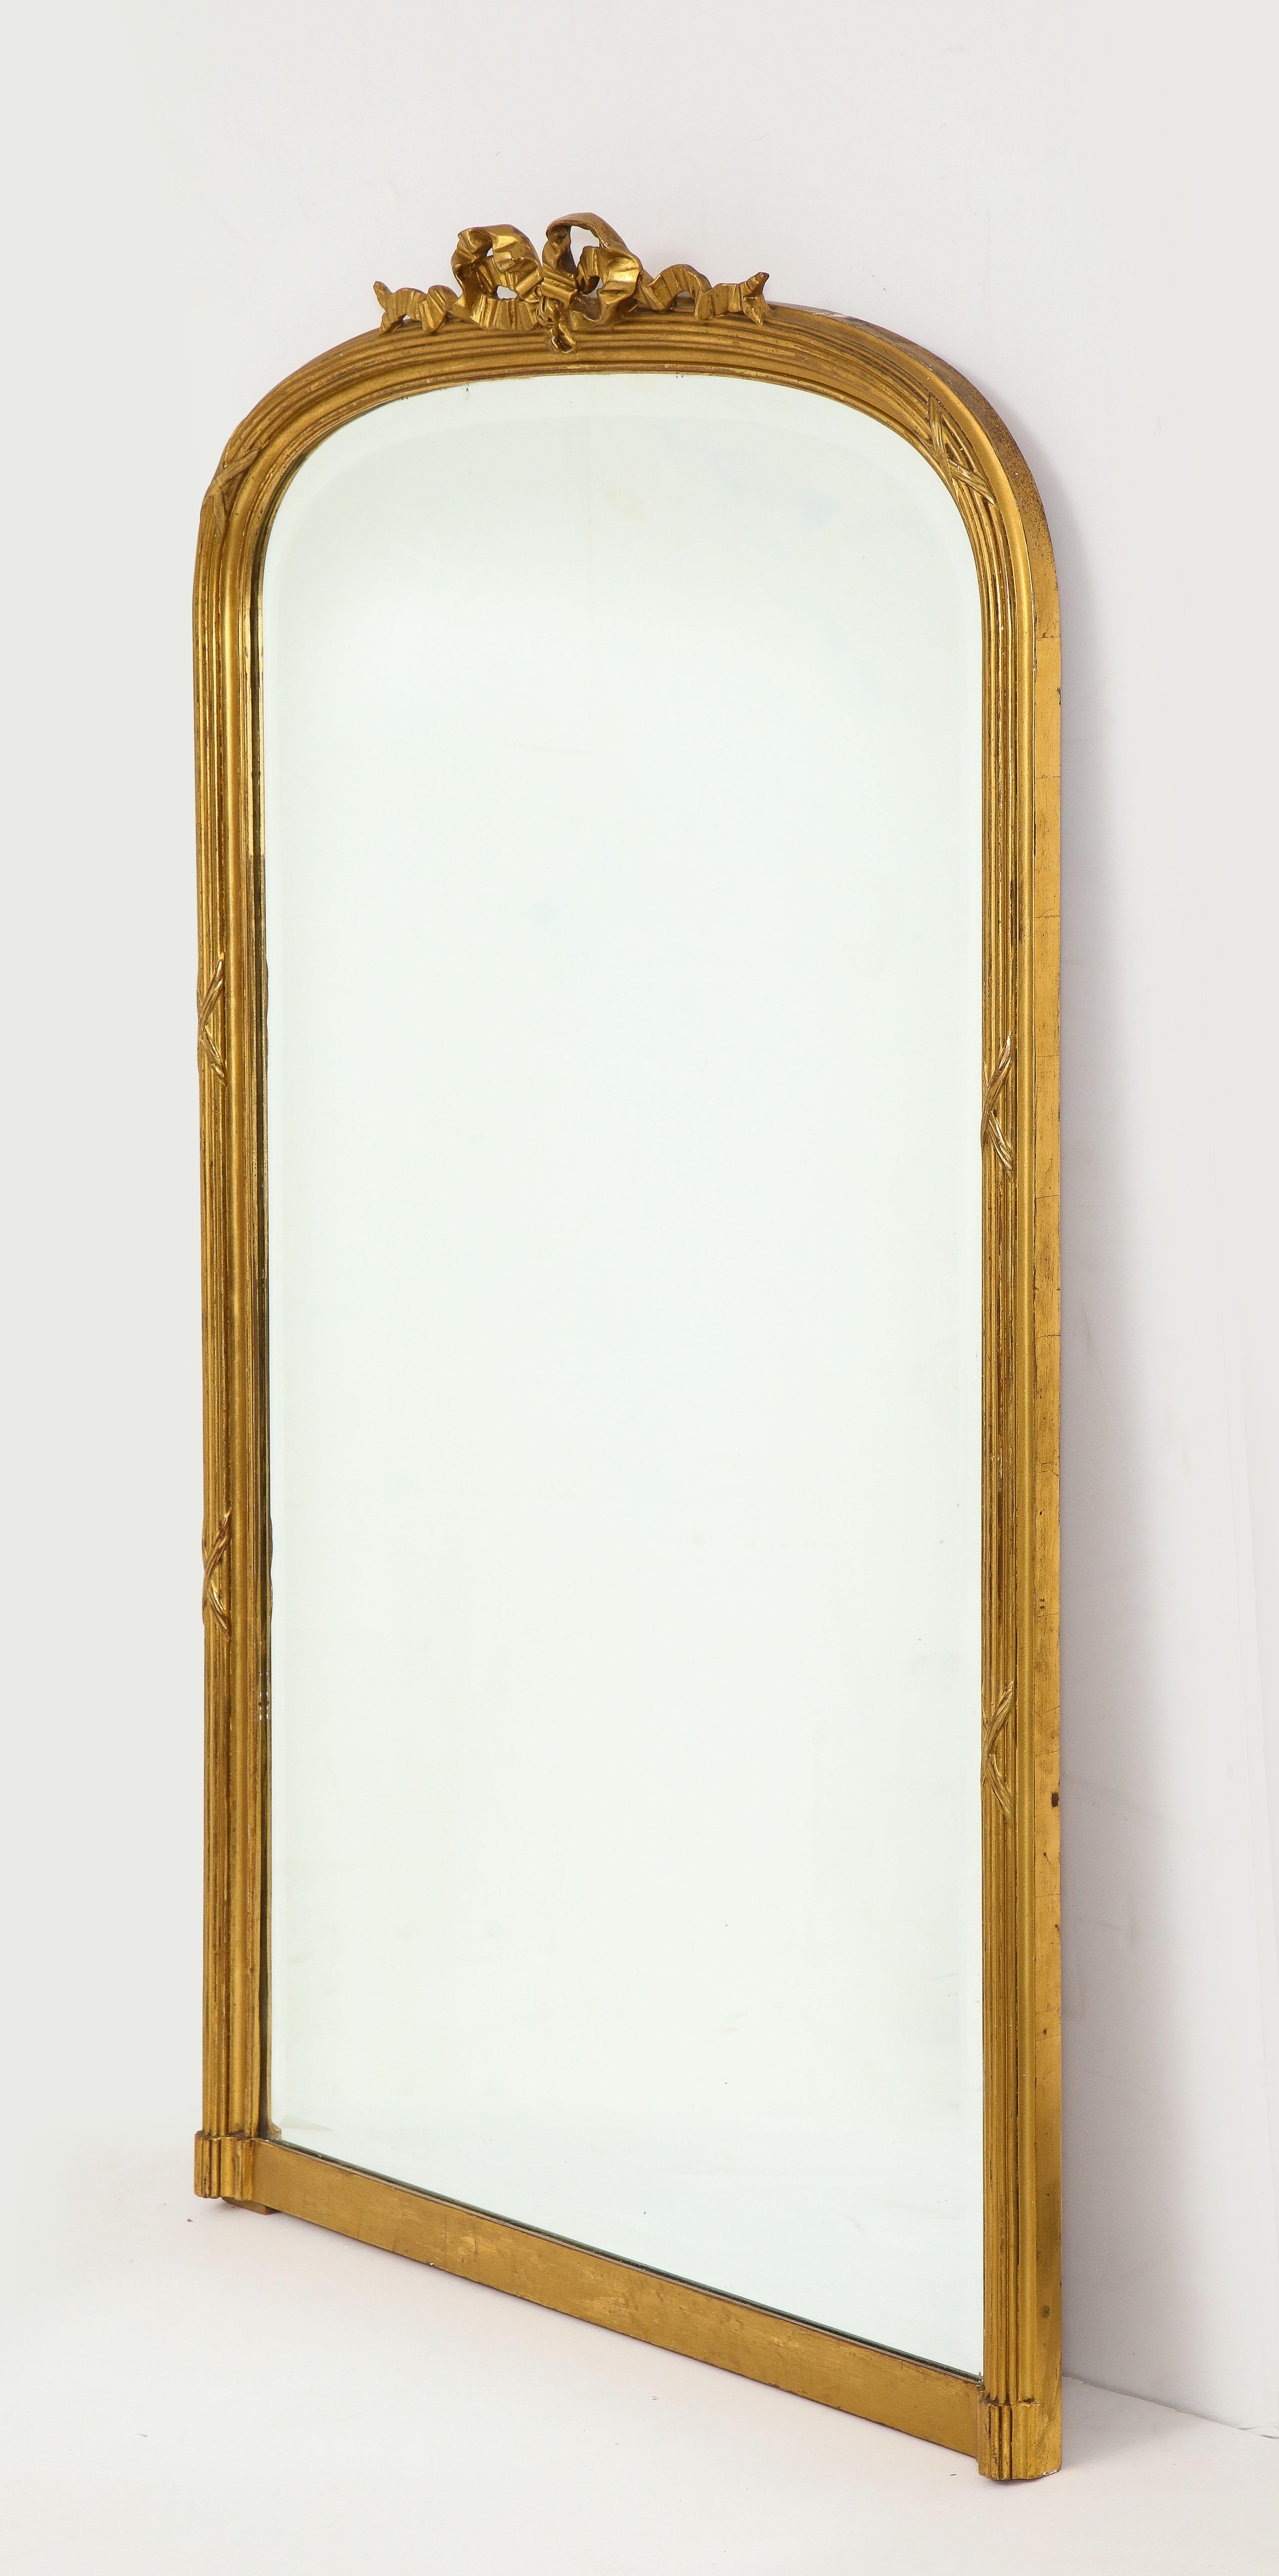 20th Century French Louis XVI Style Gilt and Gesso Over-Mantel Mirror 3